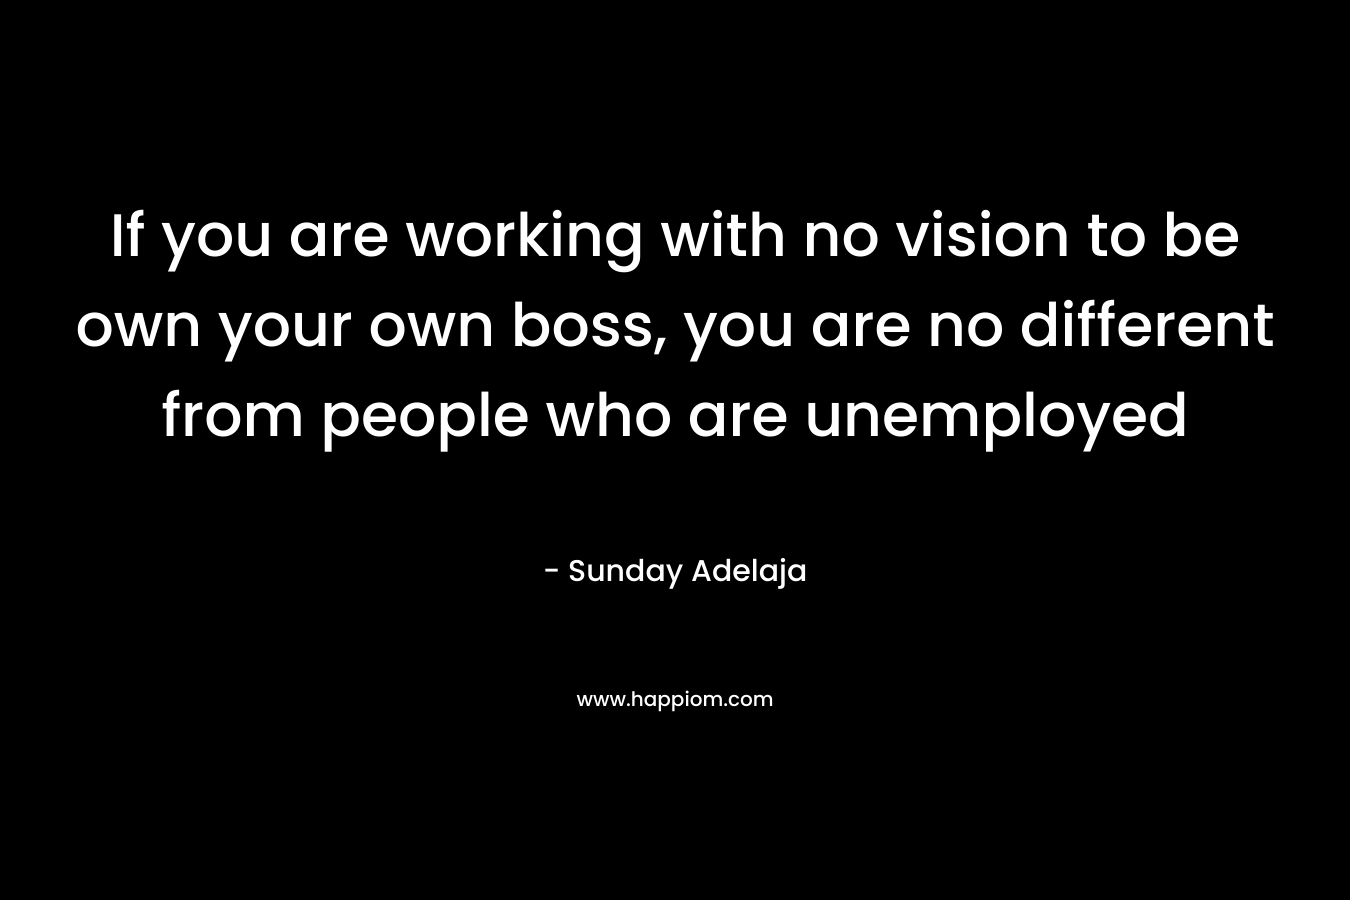 If you are working with no vision to be own your own boss, you are no different from people who are unemployed